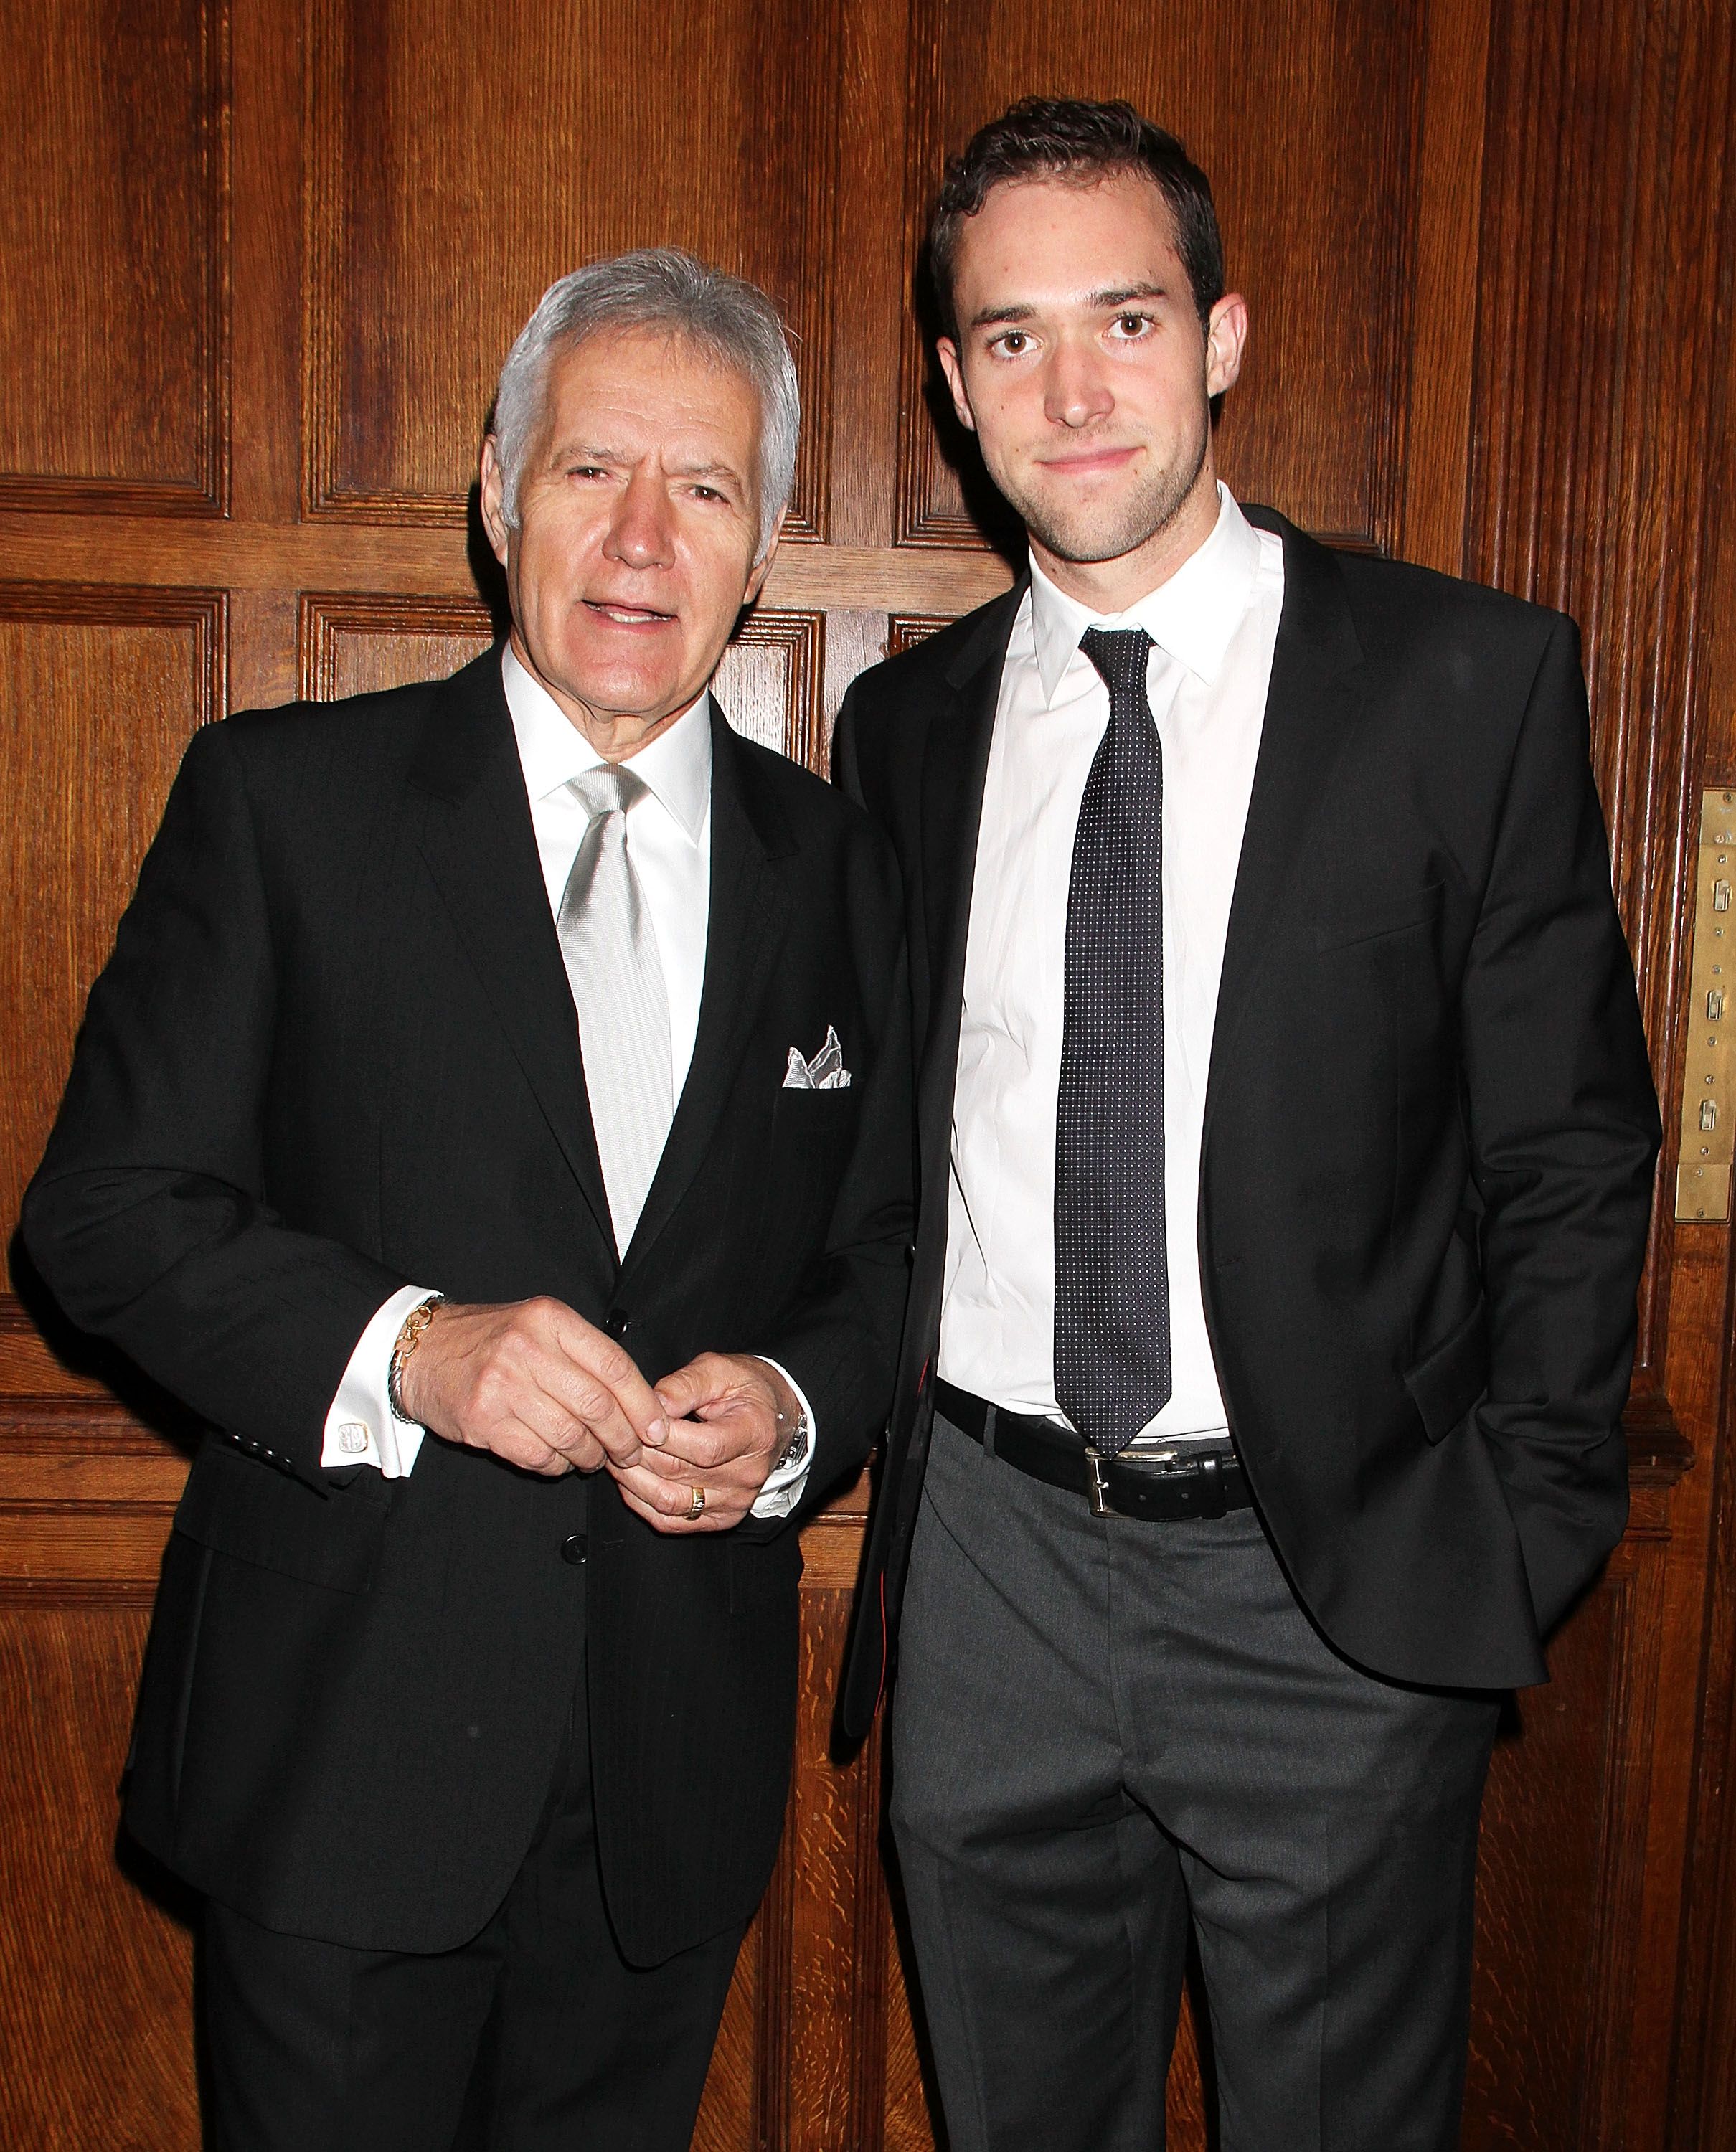 Alex Trebek and son Matthew Trebek at the 11th annual Giants of Broadcasting Honors at Gotham Hall on October 16, 2013 | Photo: Getty Images